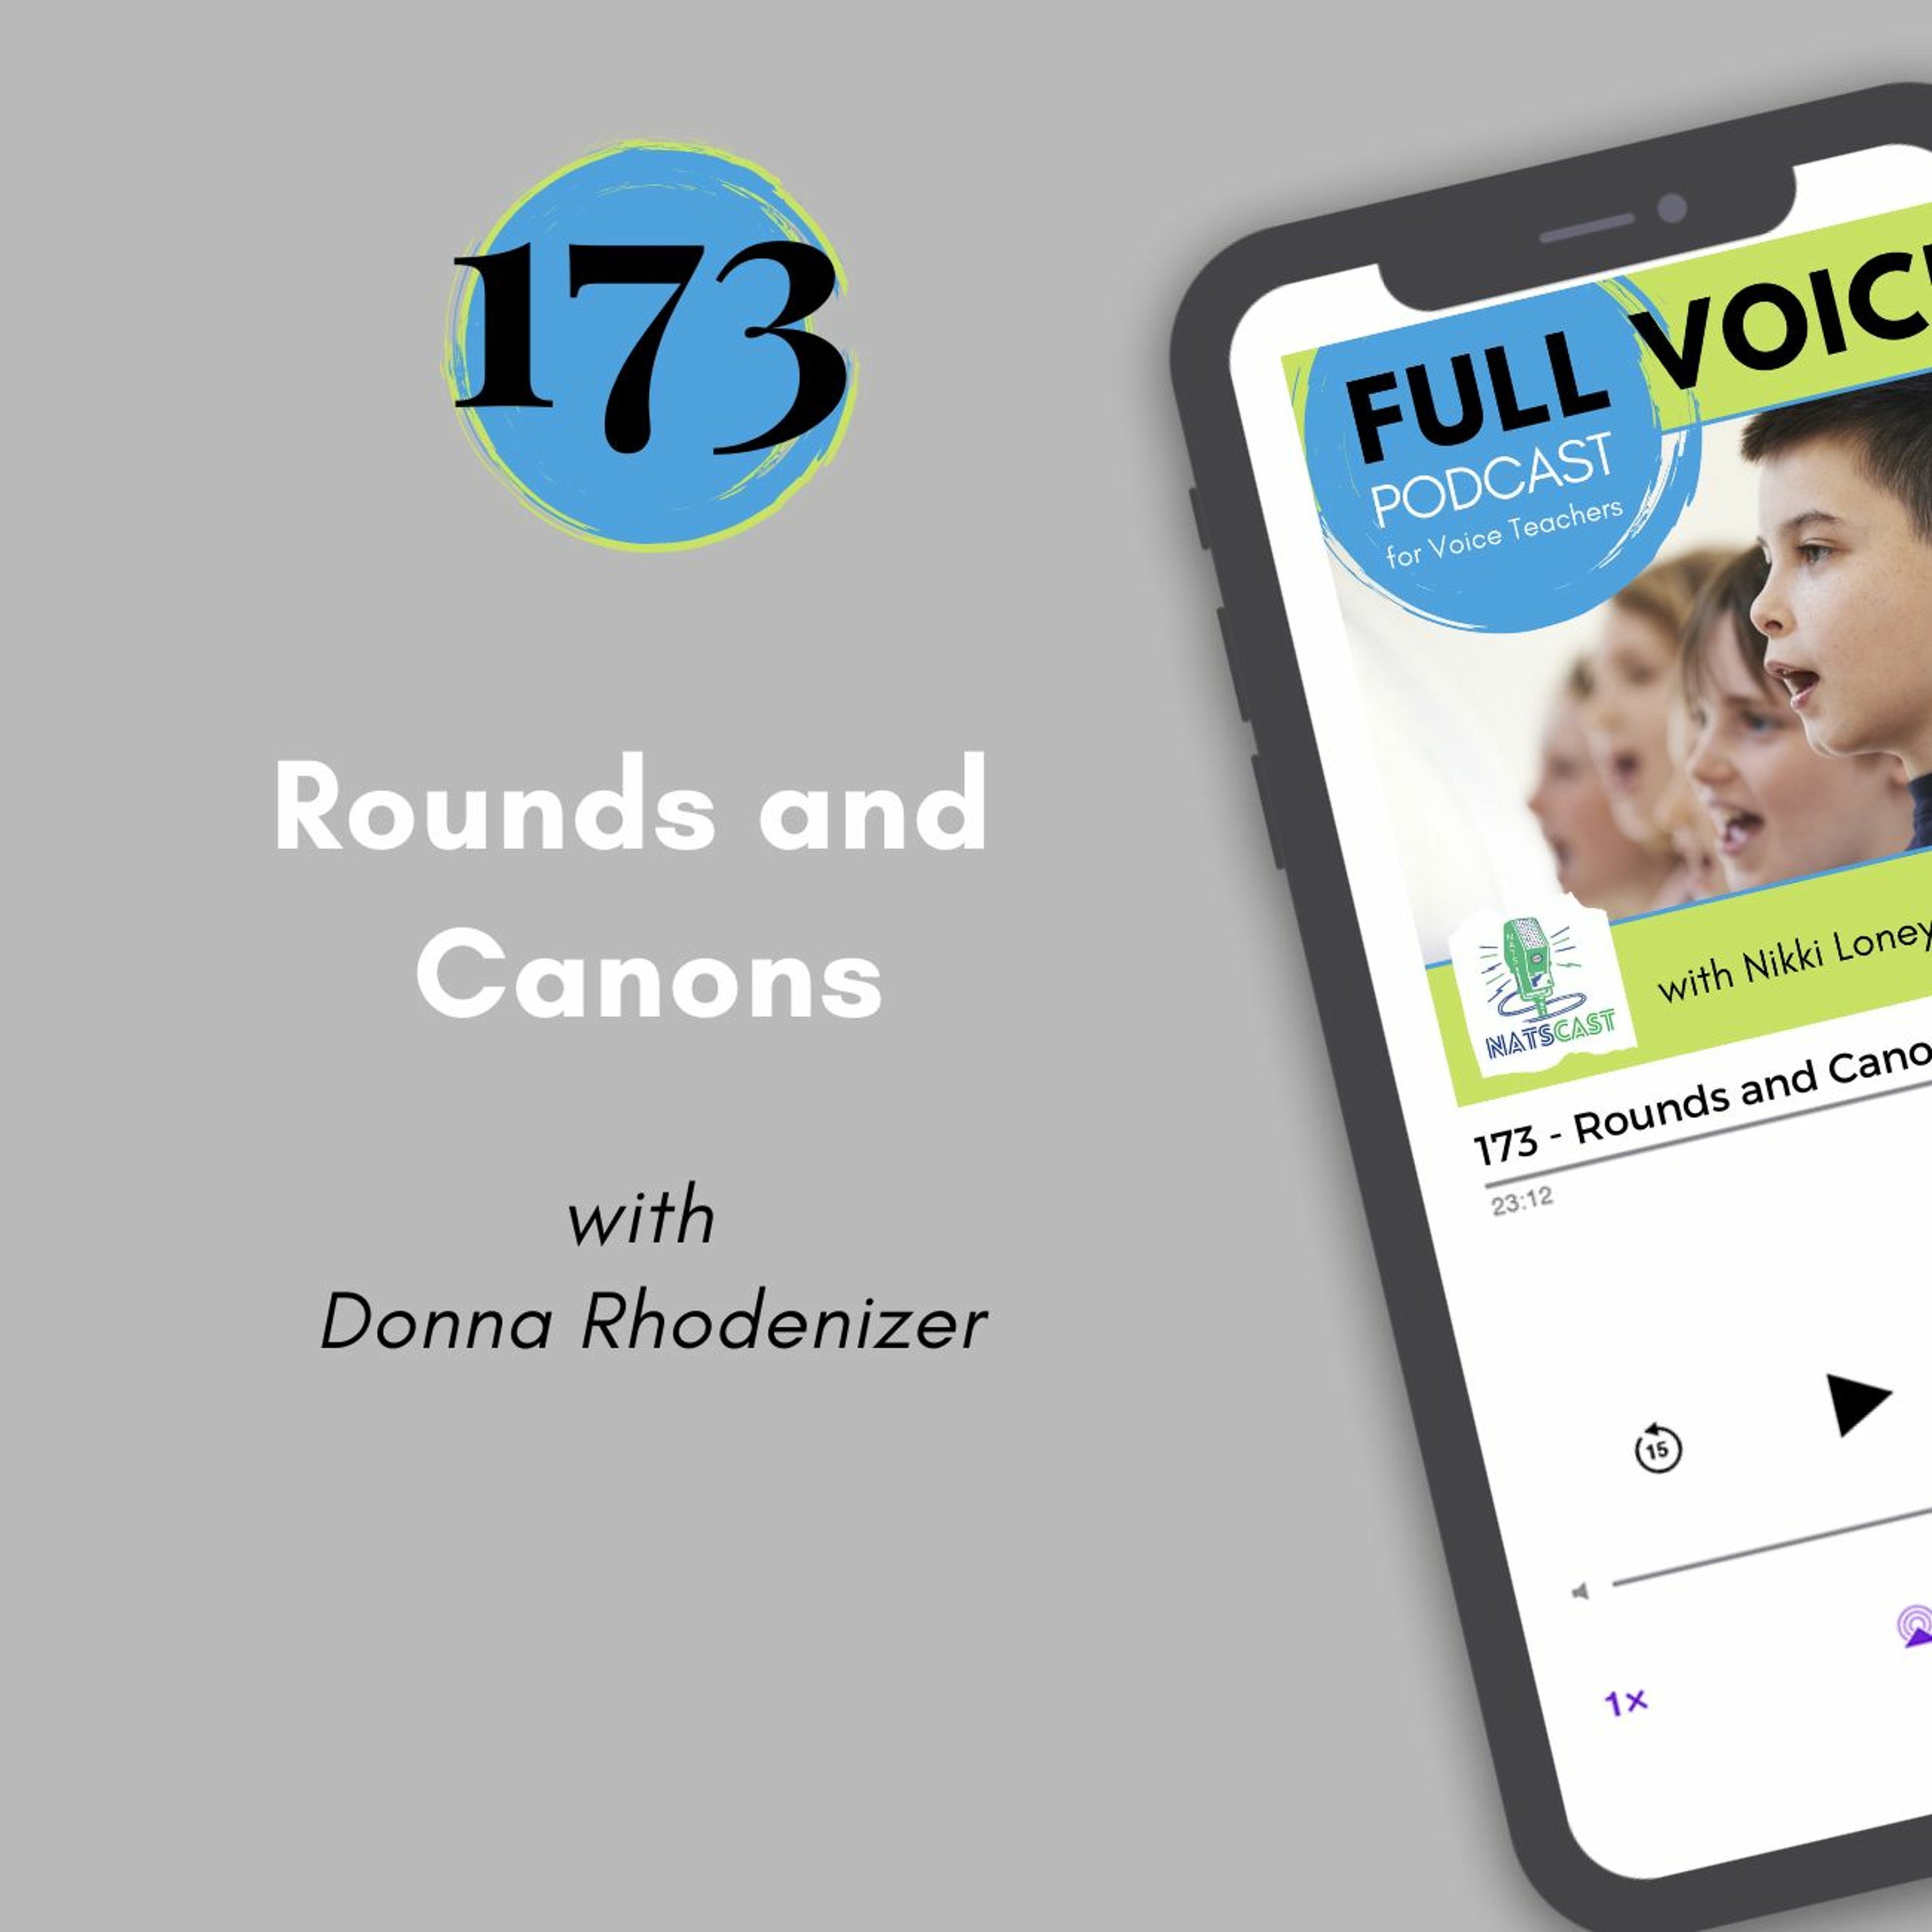 FVPC #173 Rounds and Canons with Donna Rhodenizer